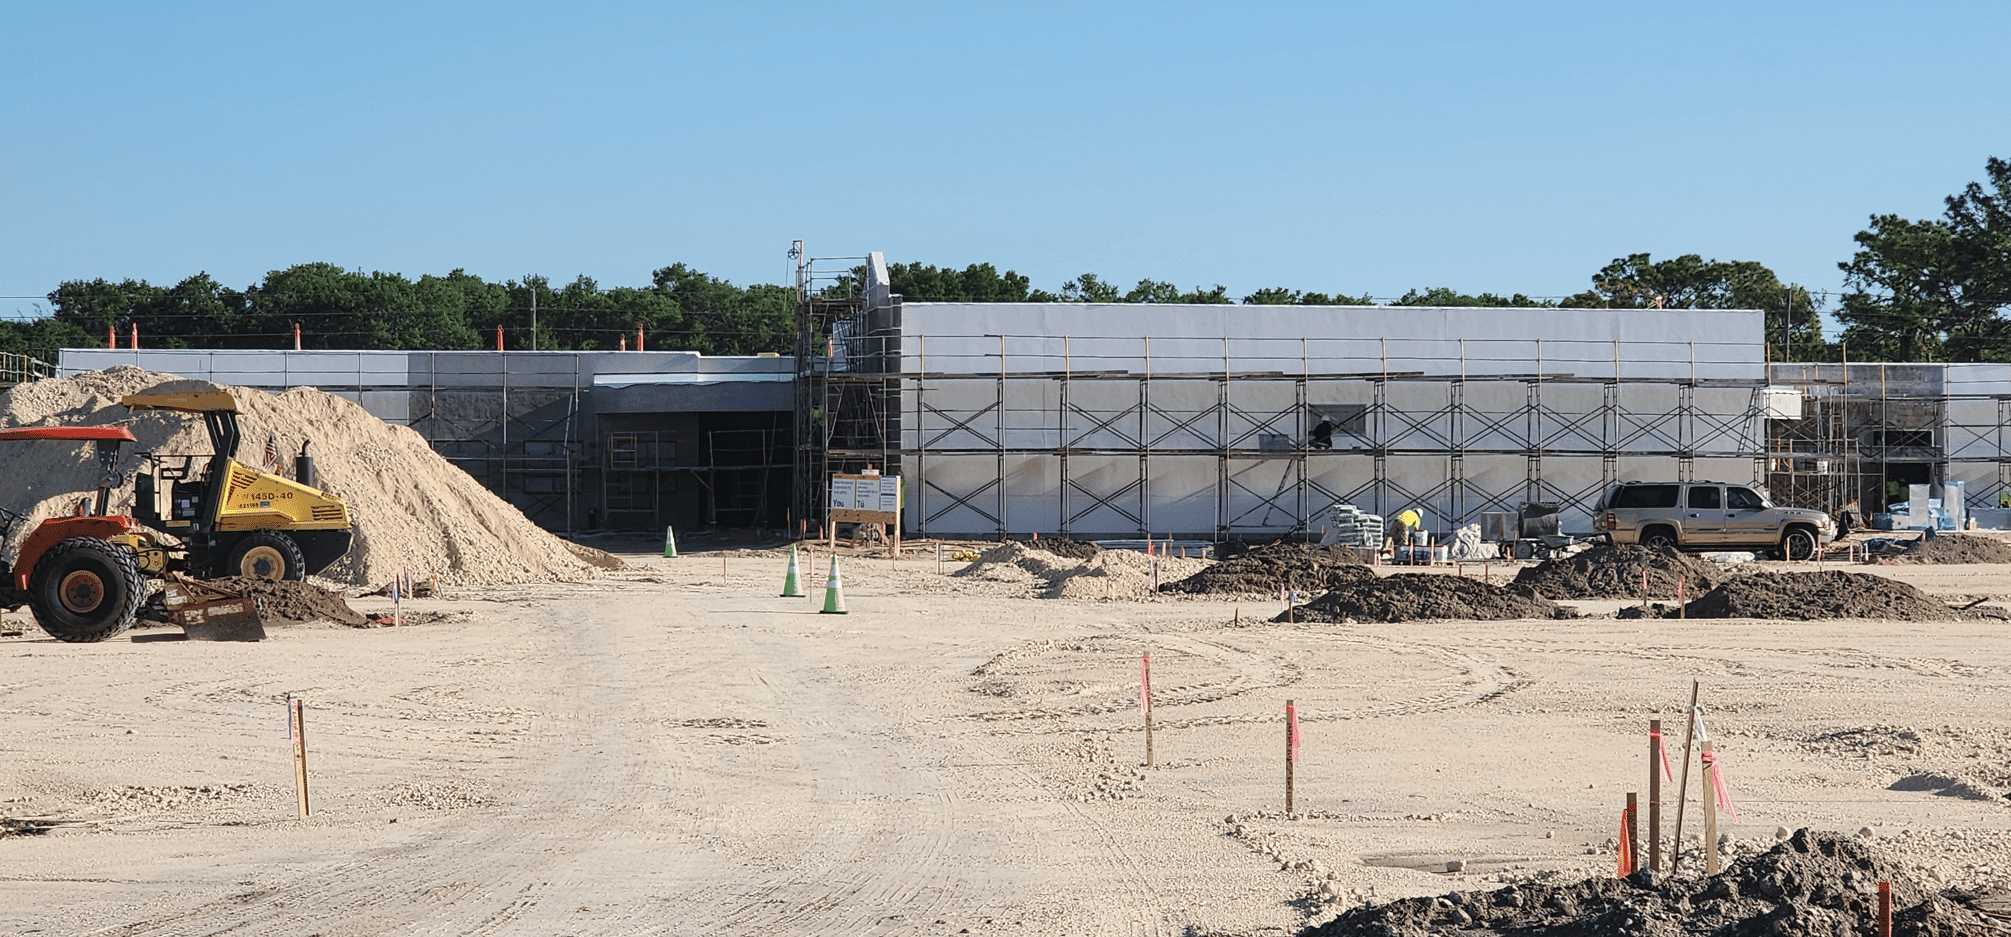 Construction of the Wilton Simpson Technical College is well underway, with completion slated for later this year. [Credit: Mark Stone/FMN]